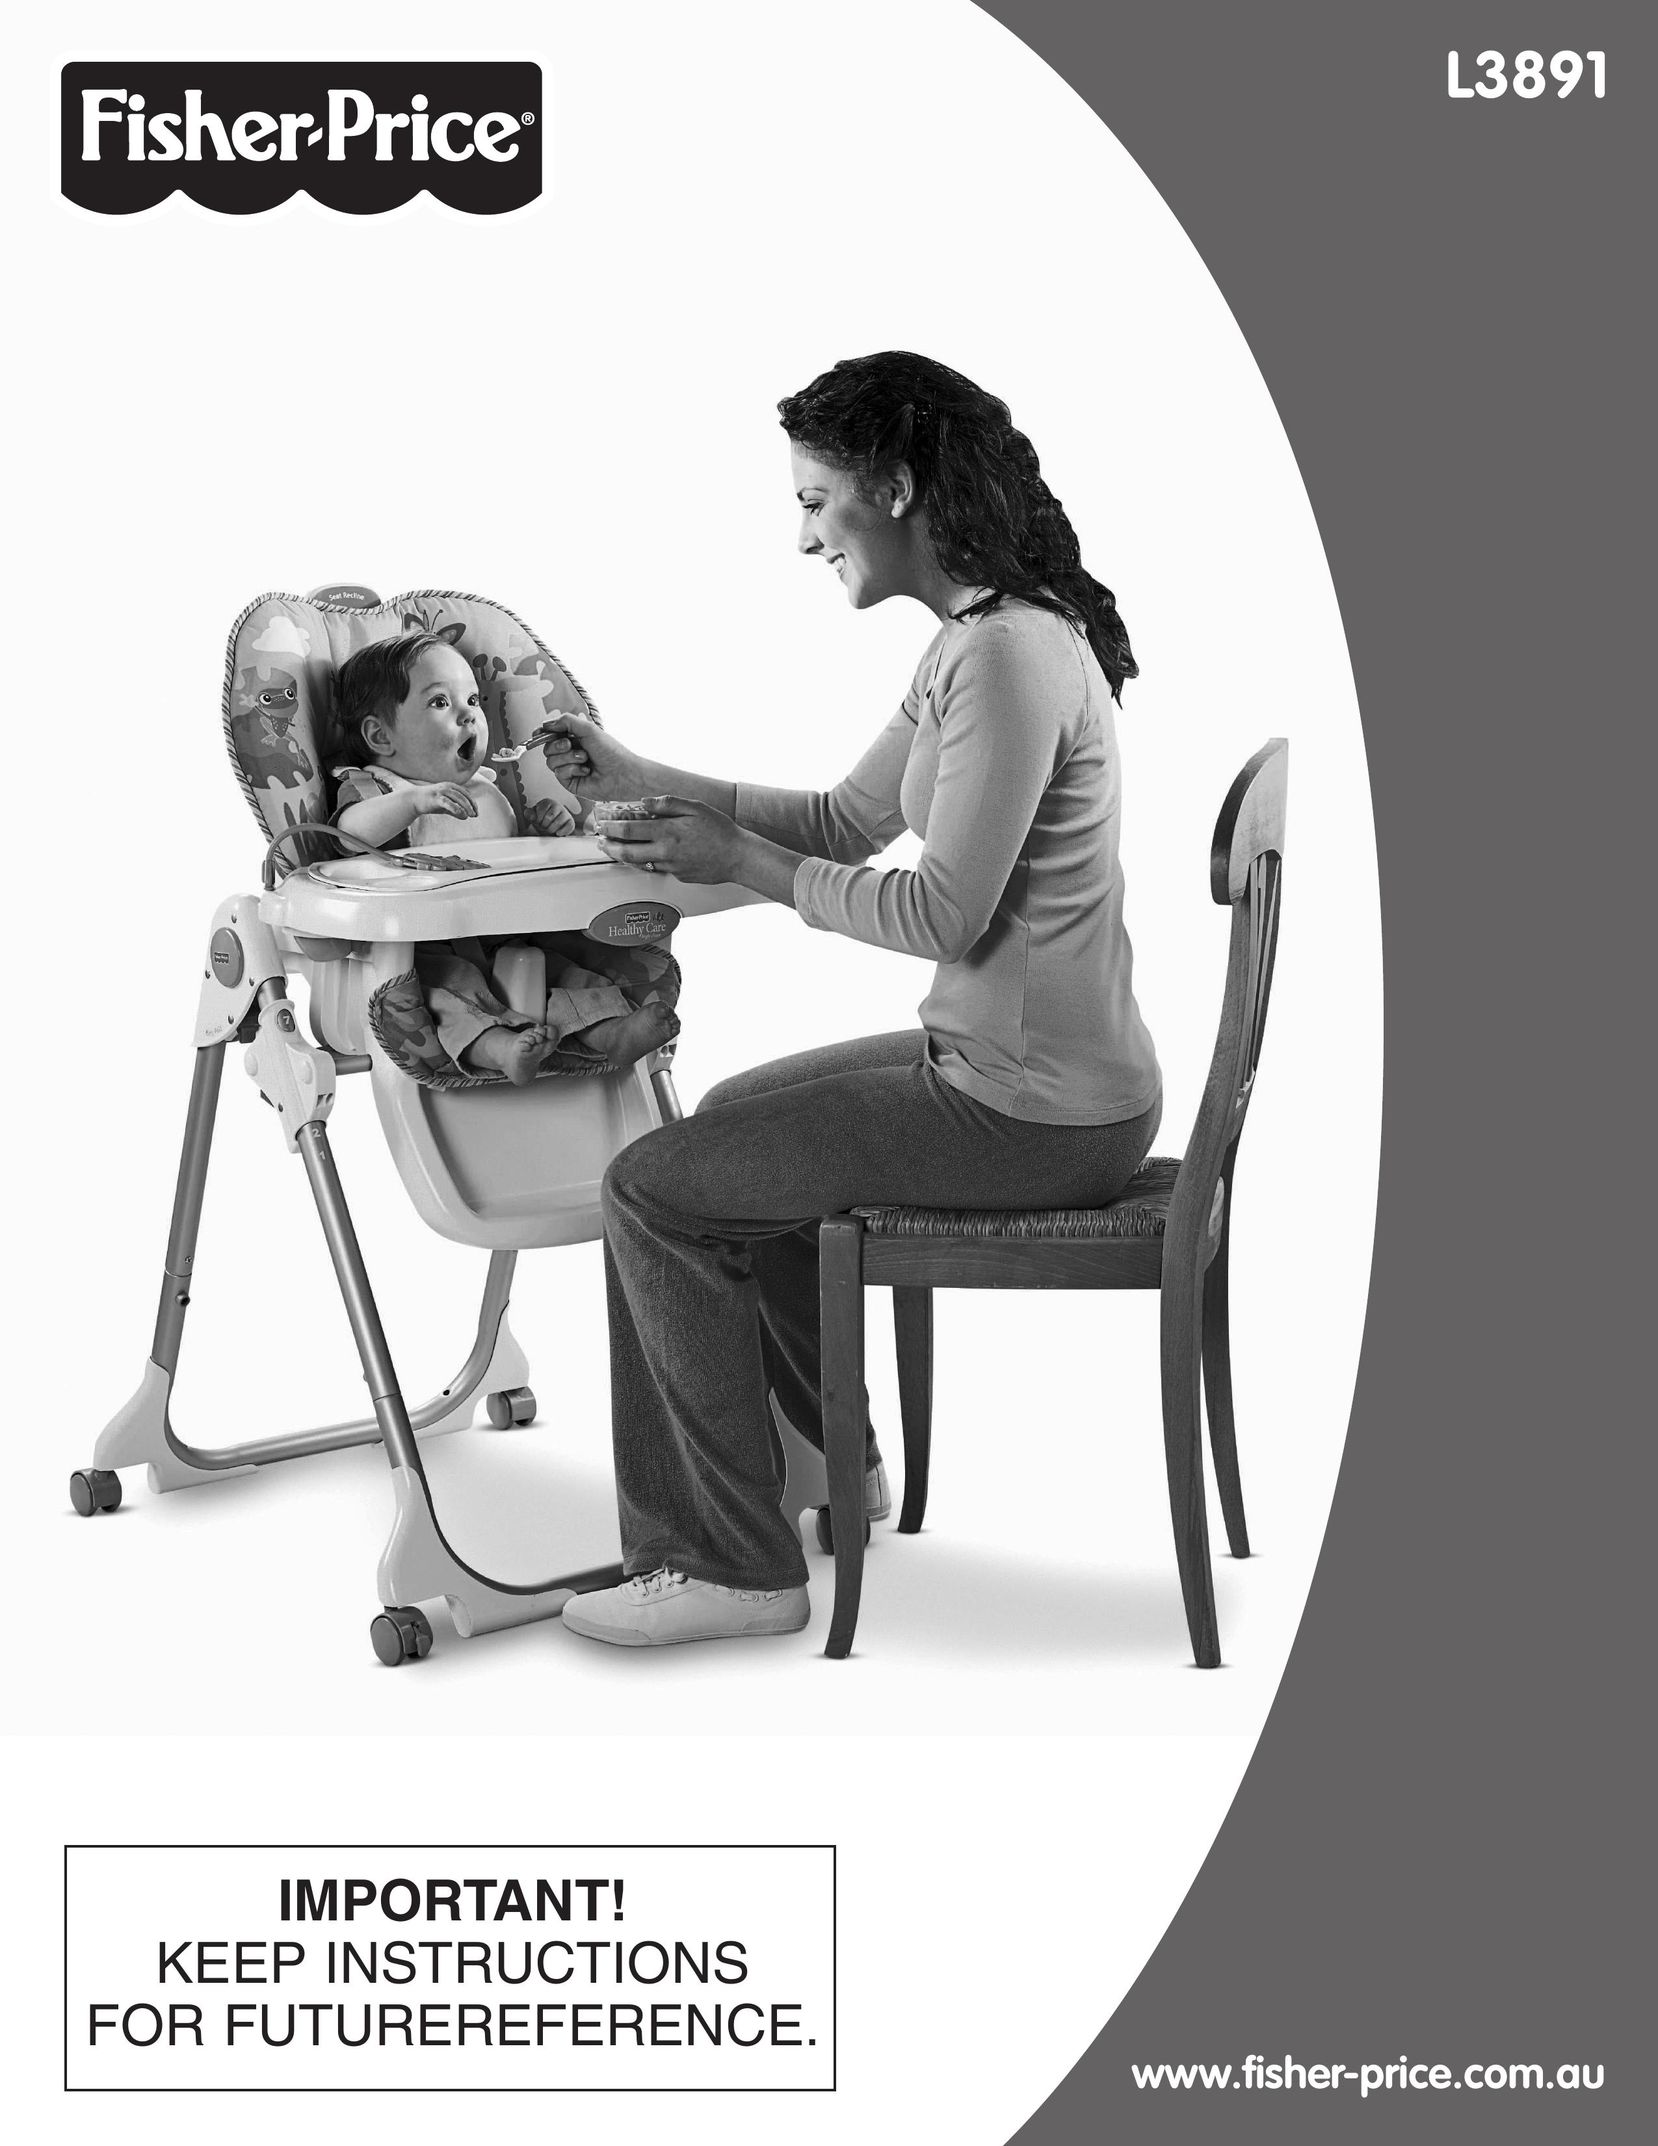 Fisher-Price L3891 High Chair User Manual